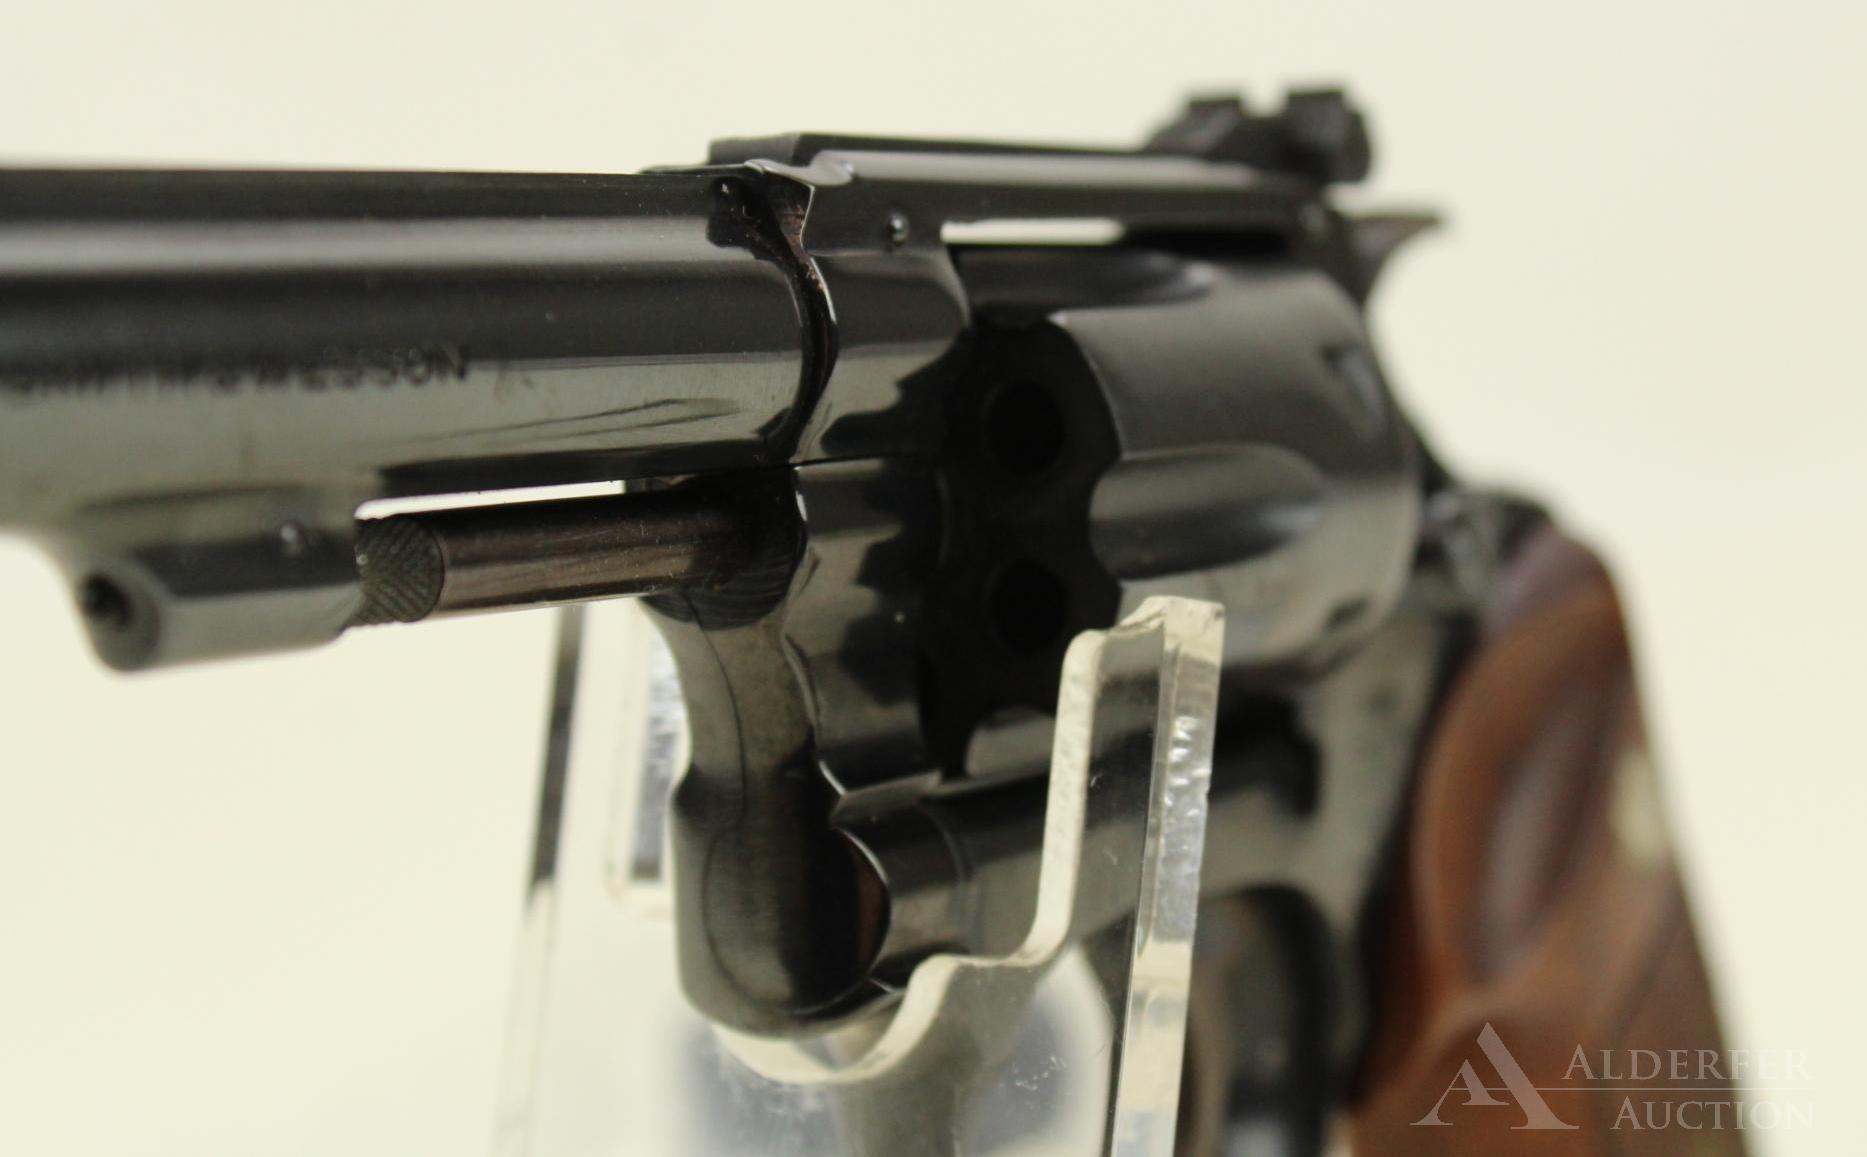 Smith & Wesson 34-1 double action revolver.